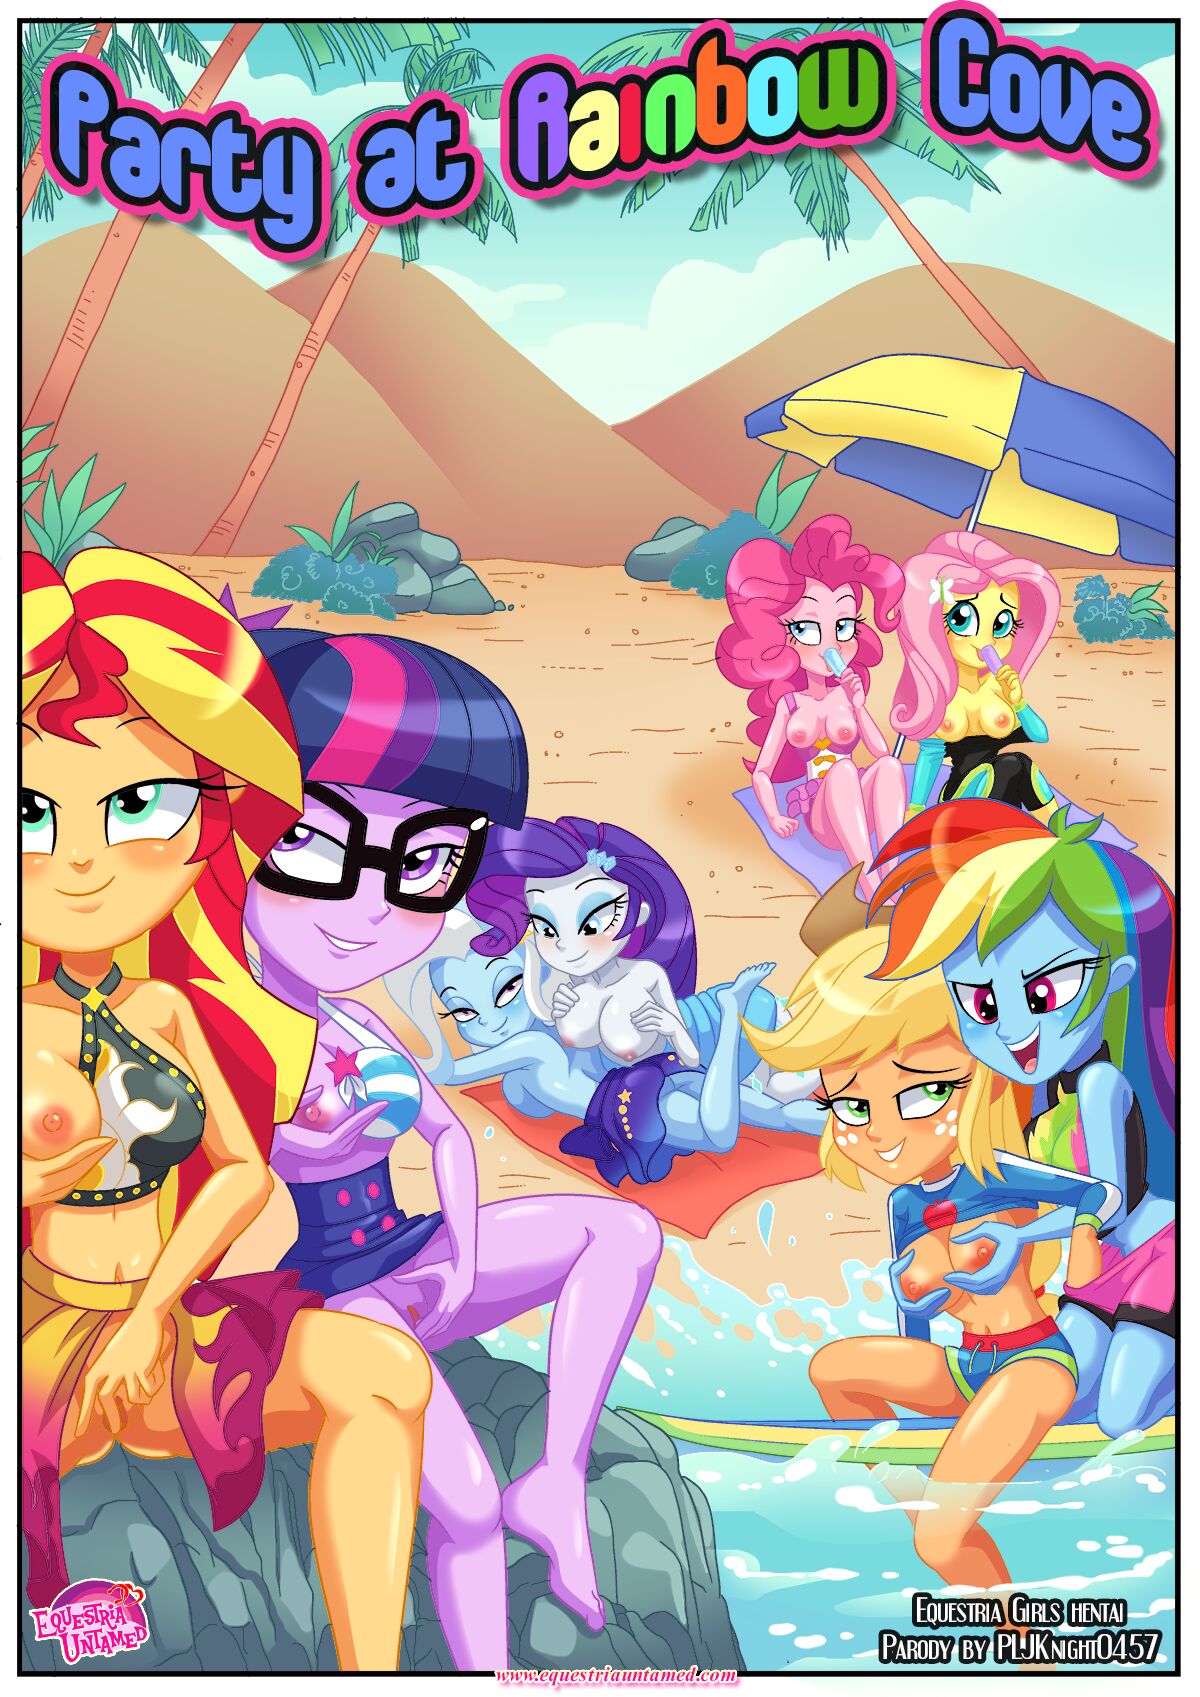 1200px x 1697px - Party At Rainbow Cove Porn Comics by [Palcomix] (Equestria Girls,My Little  Pony Friendship is Magic) Rule 34 Comics â€“ R34Porn